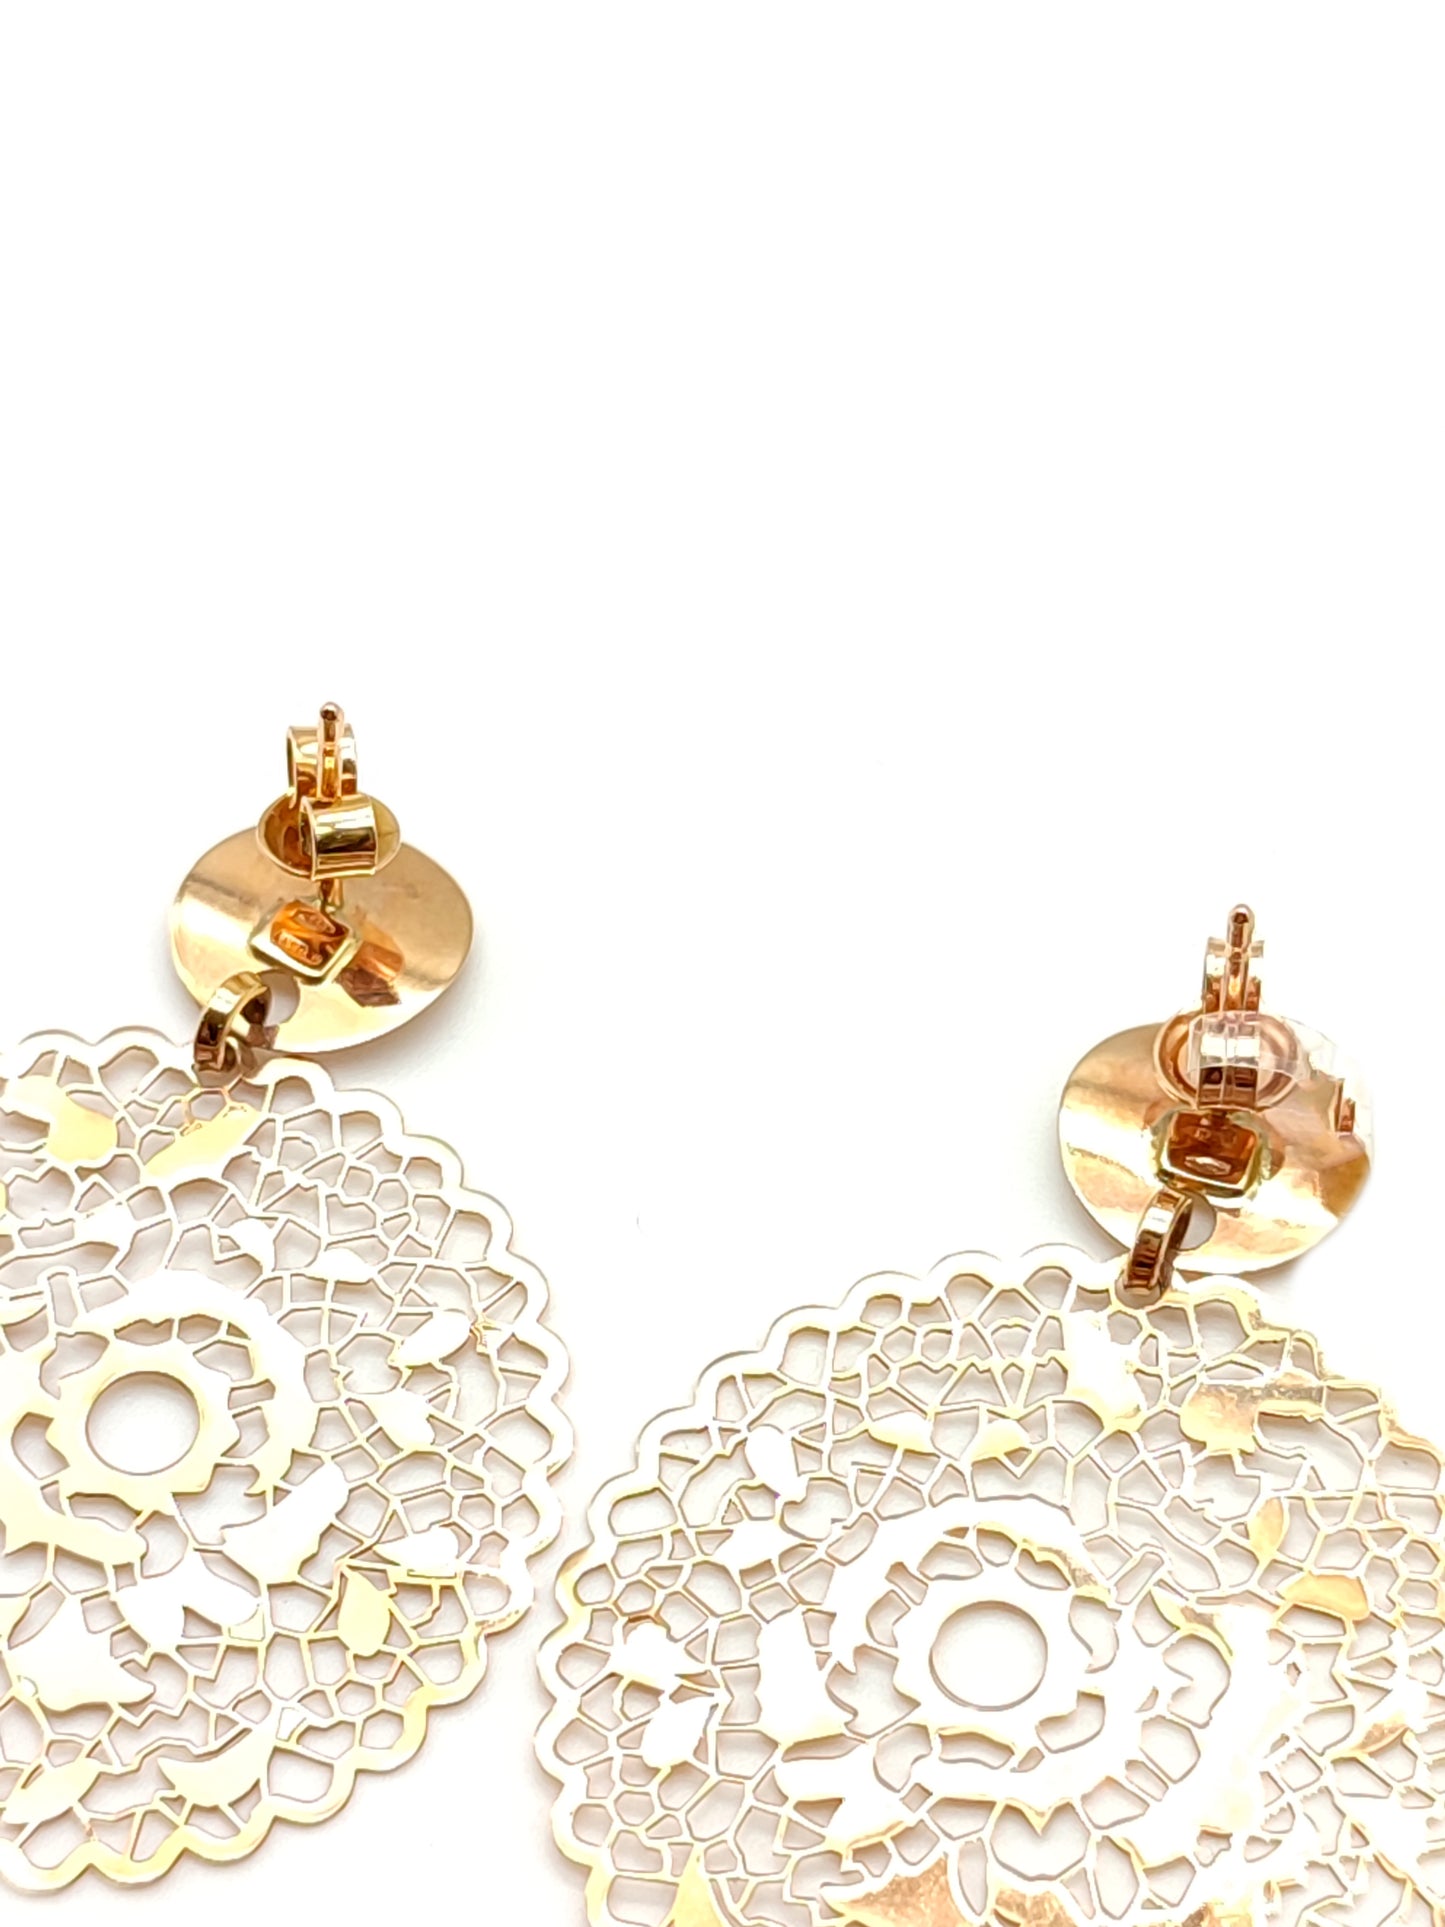 Dangle gold earrings worked with fretwork